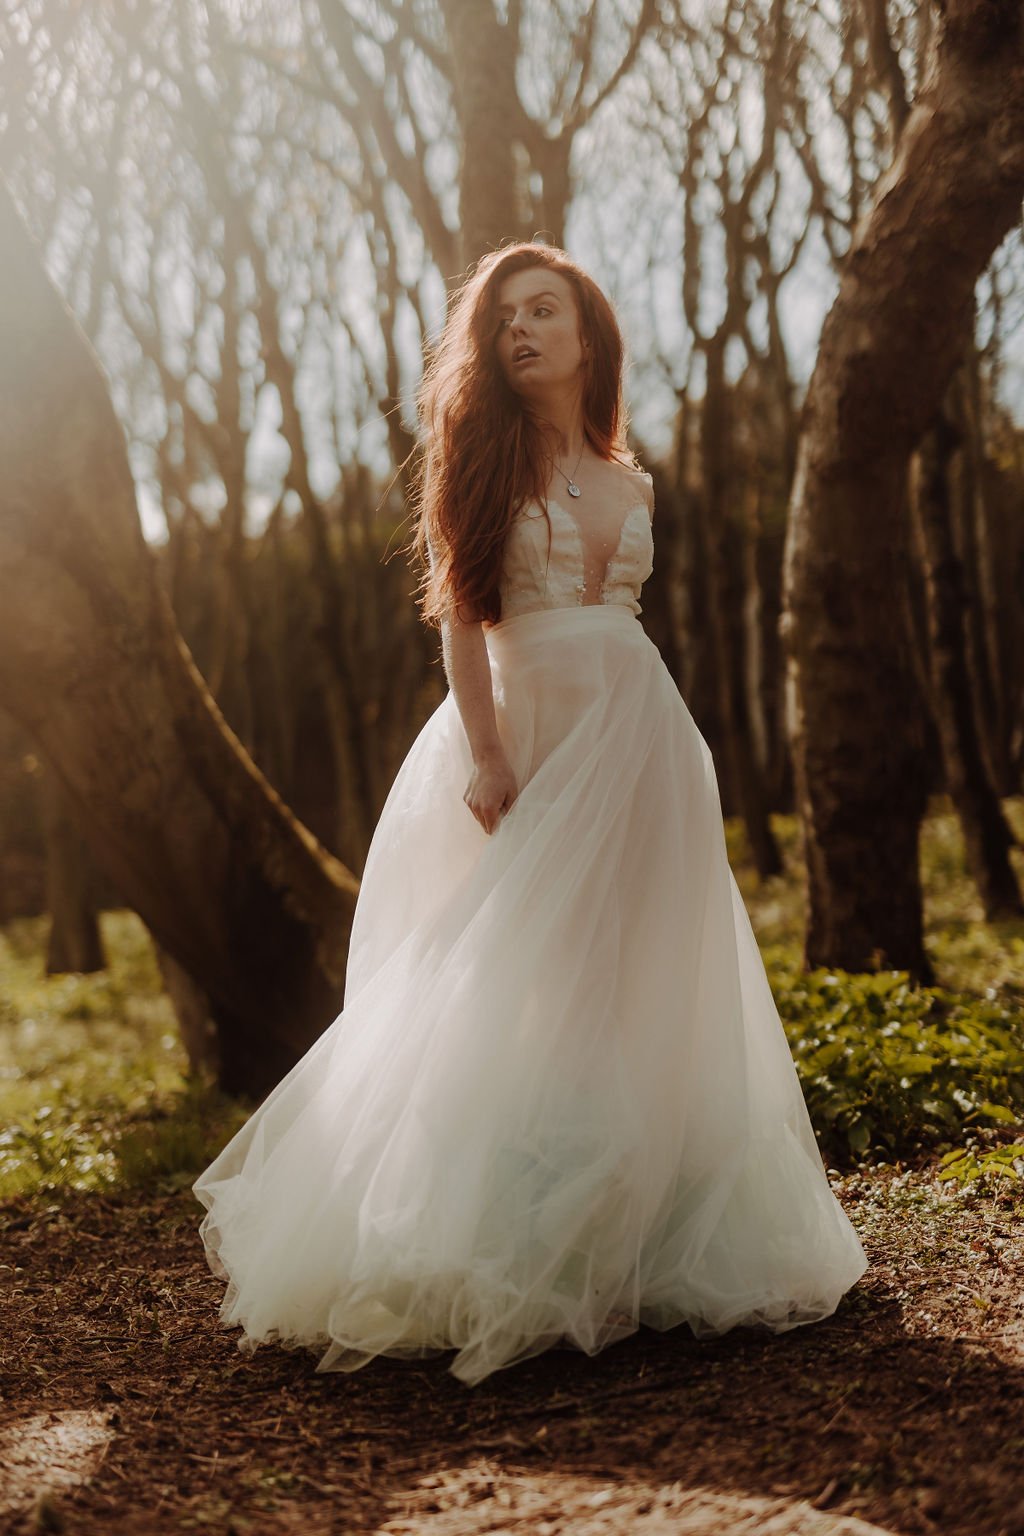 Stood in a forest the bride is wearing a timeless wedding dress with cut out top and full skirt.